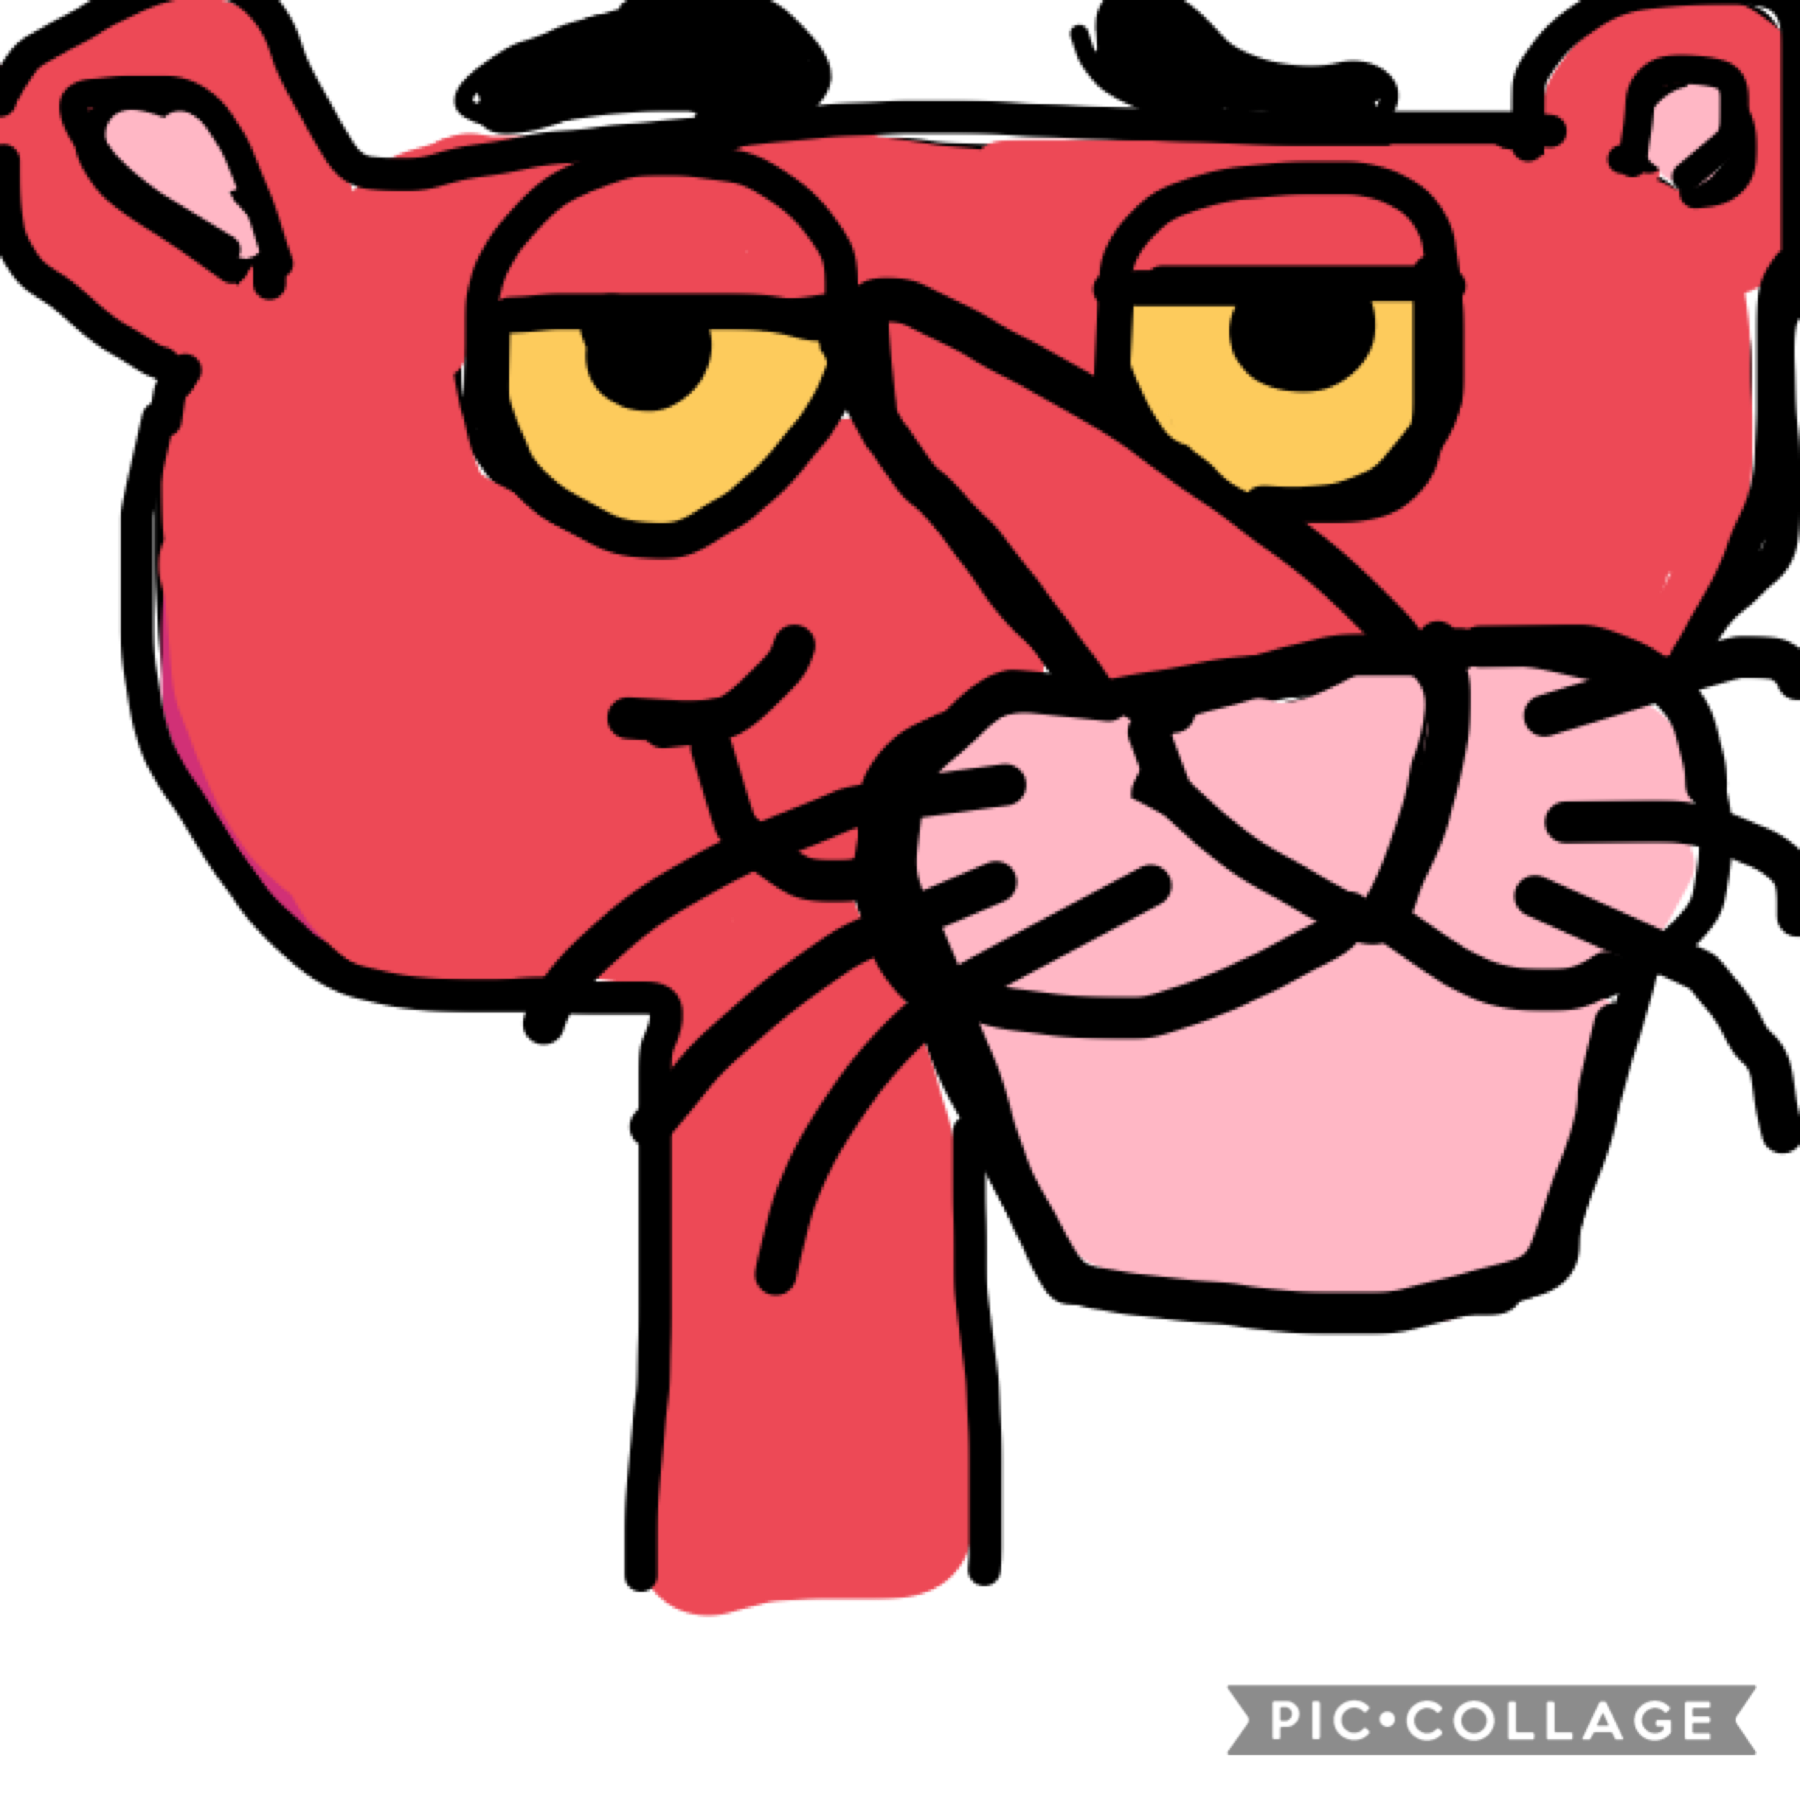 I made this #pinkpanther idk